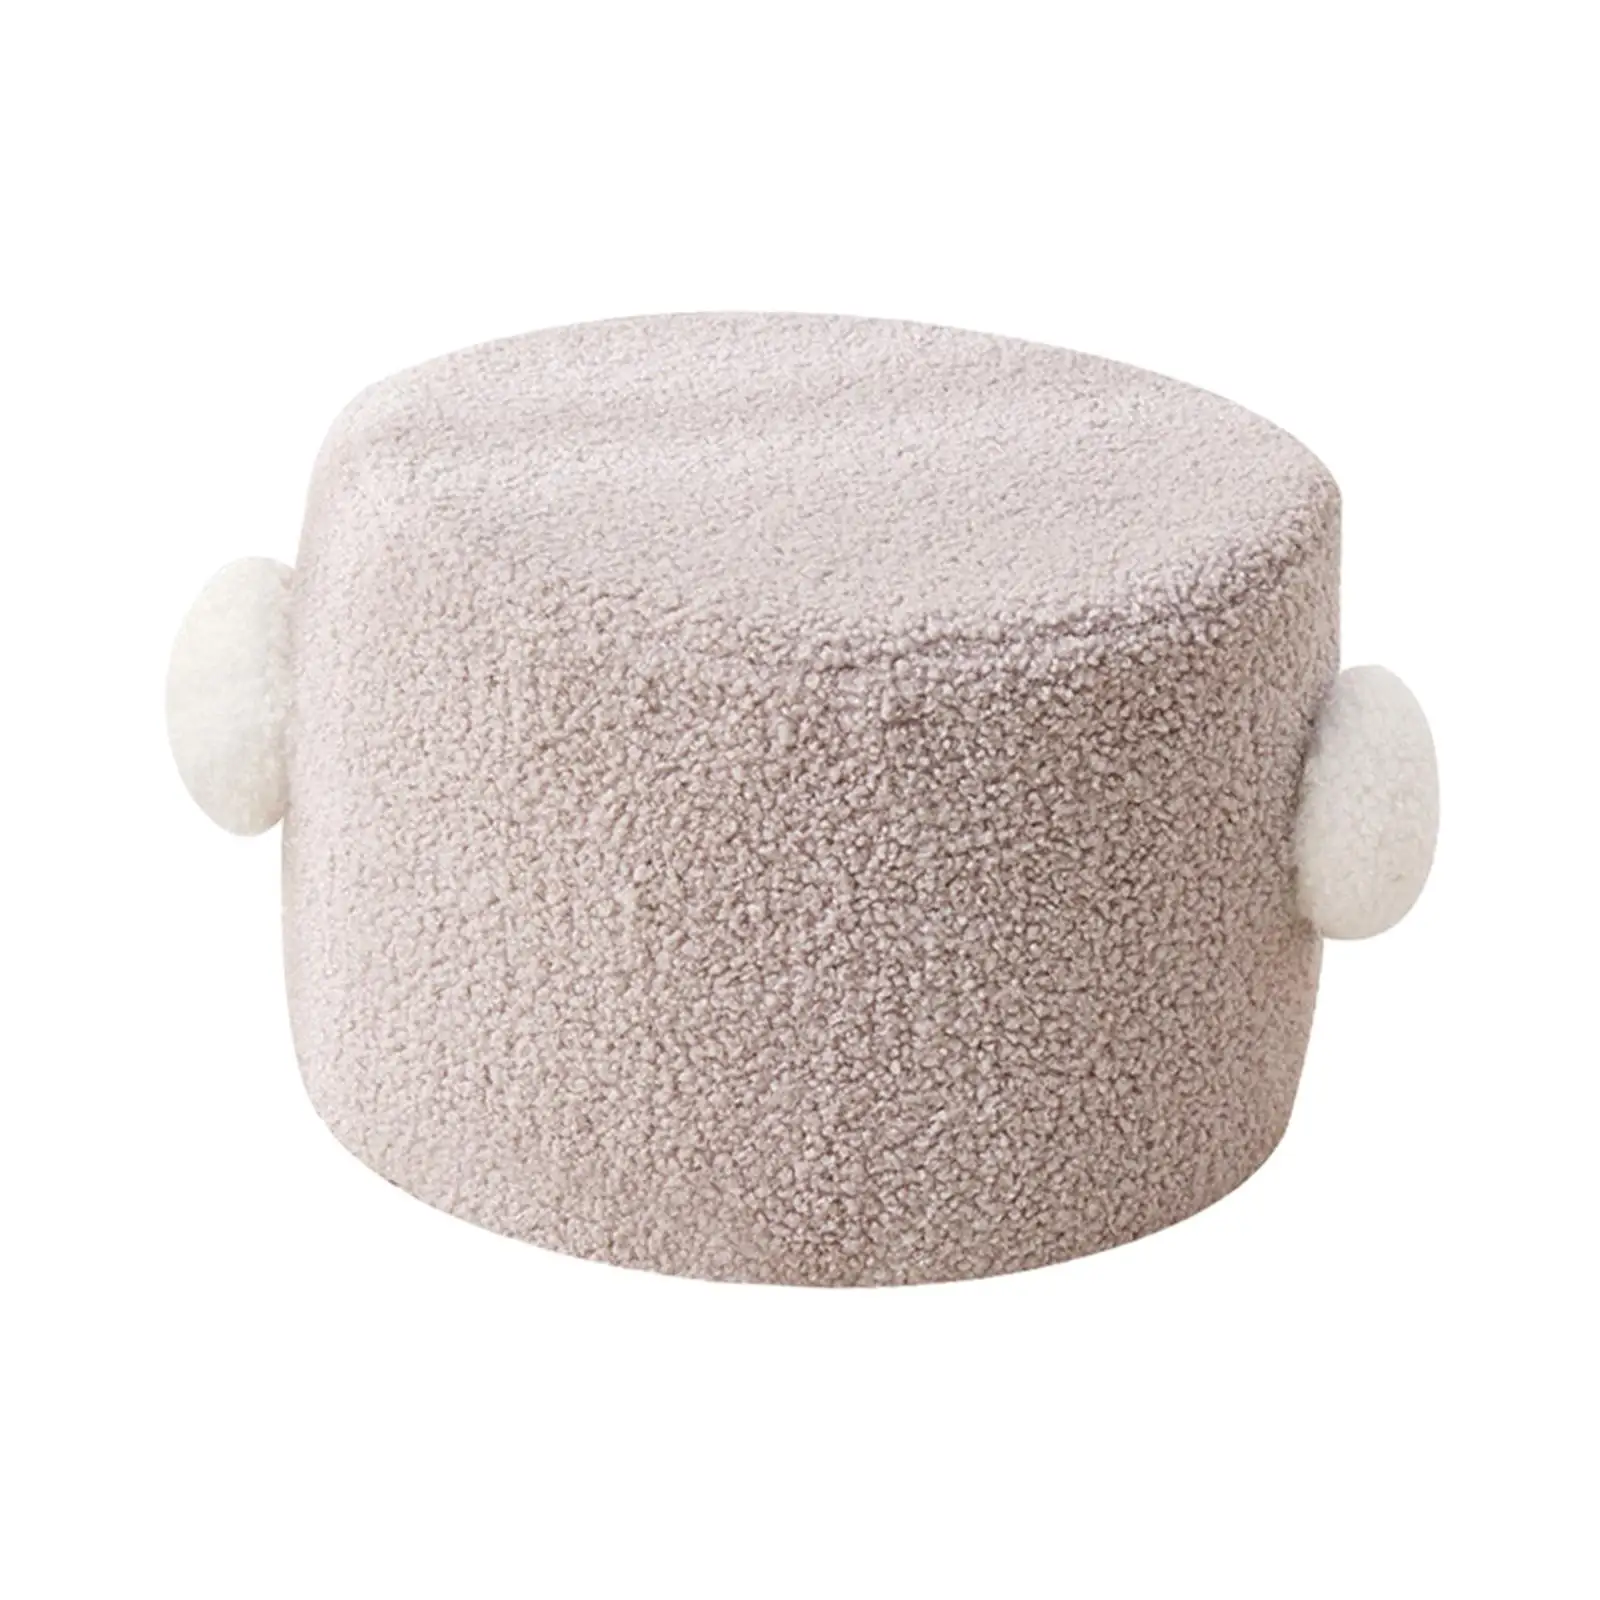 Small Footstool Mute Bottom Pads Detachable Cover Seat Chair Sofa Tea Stool for Living Room Apartment Doorway Nursery Entryway